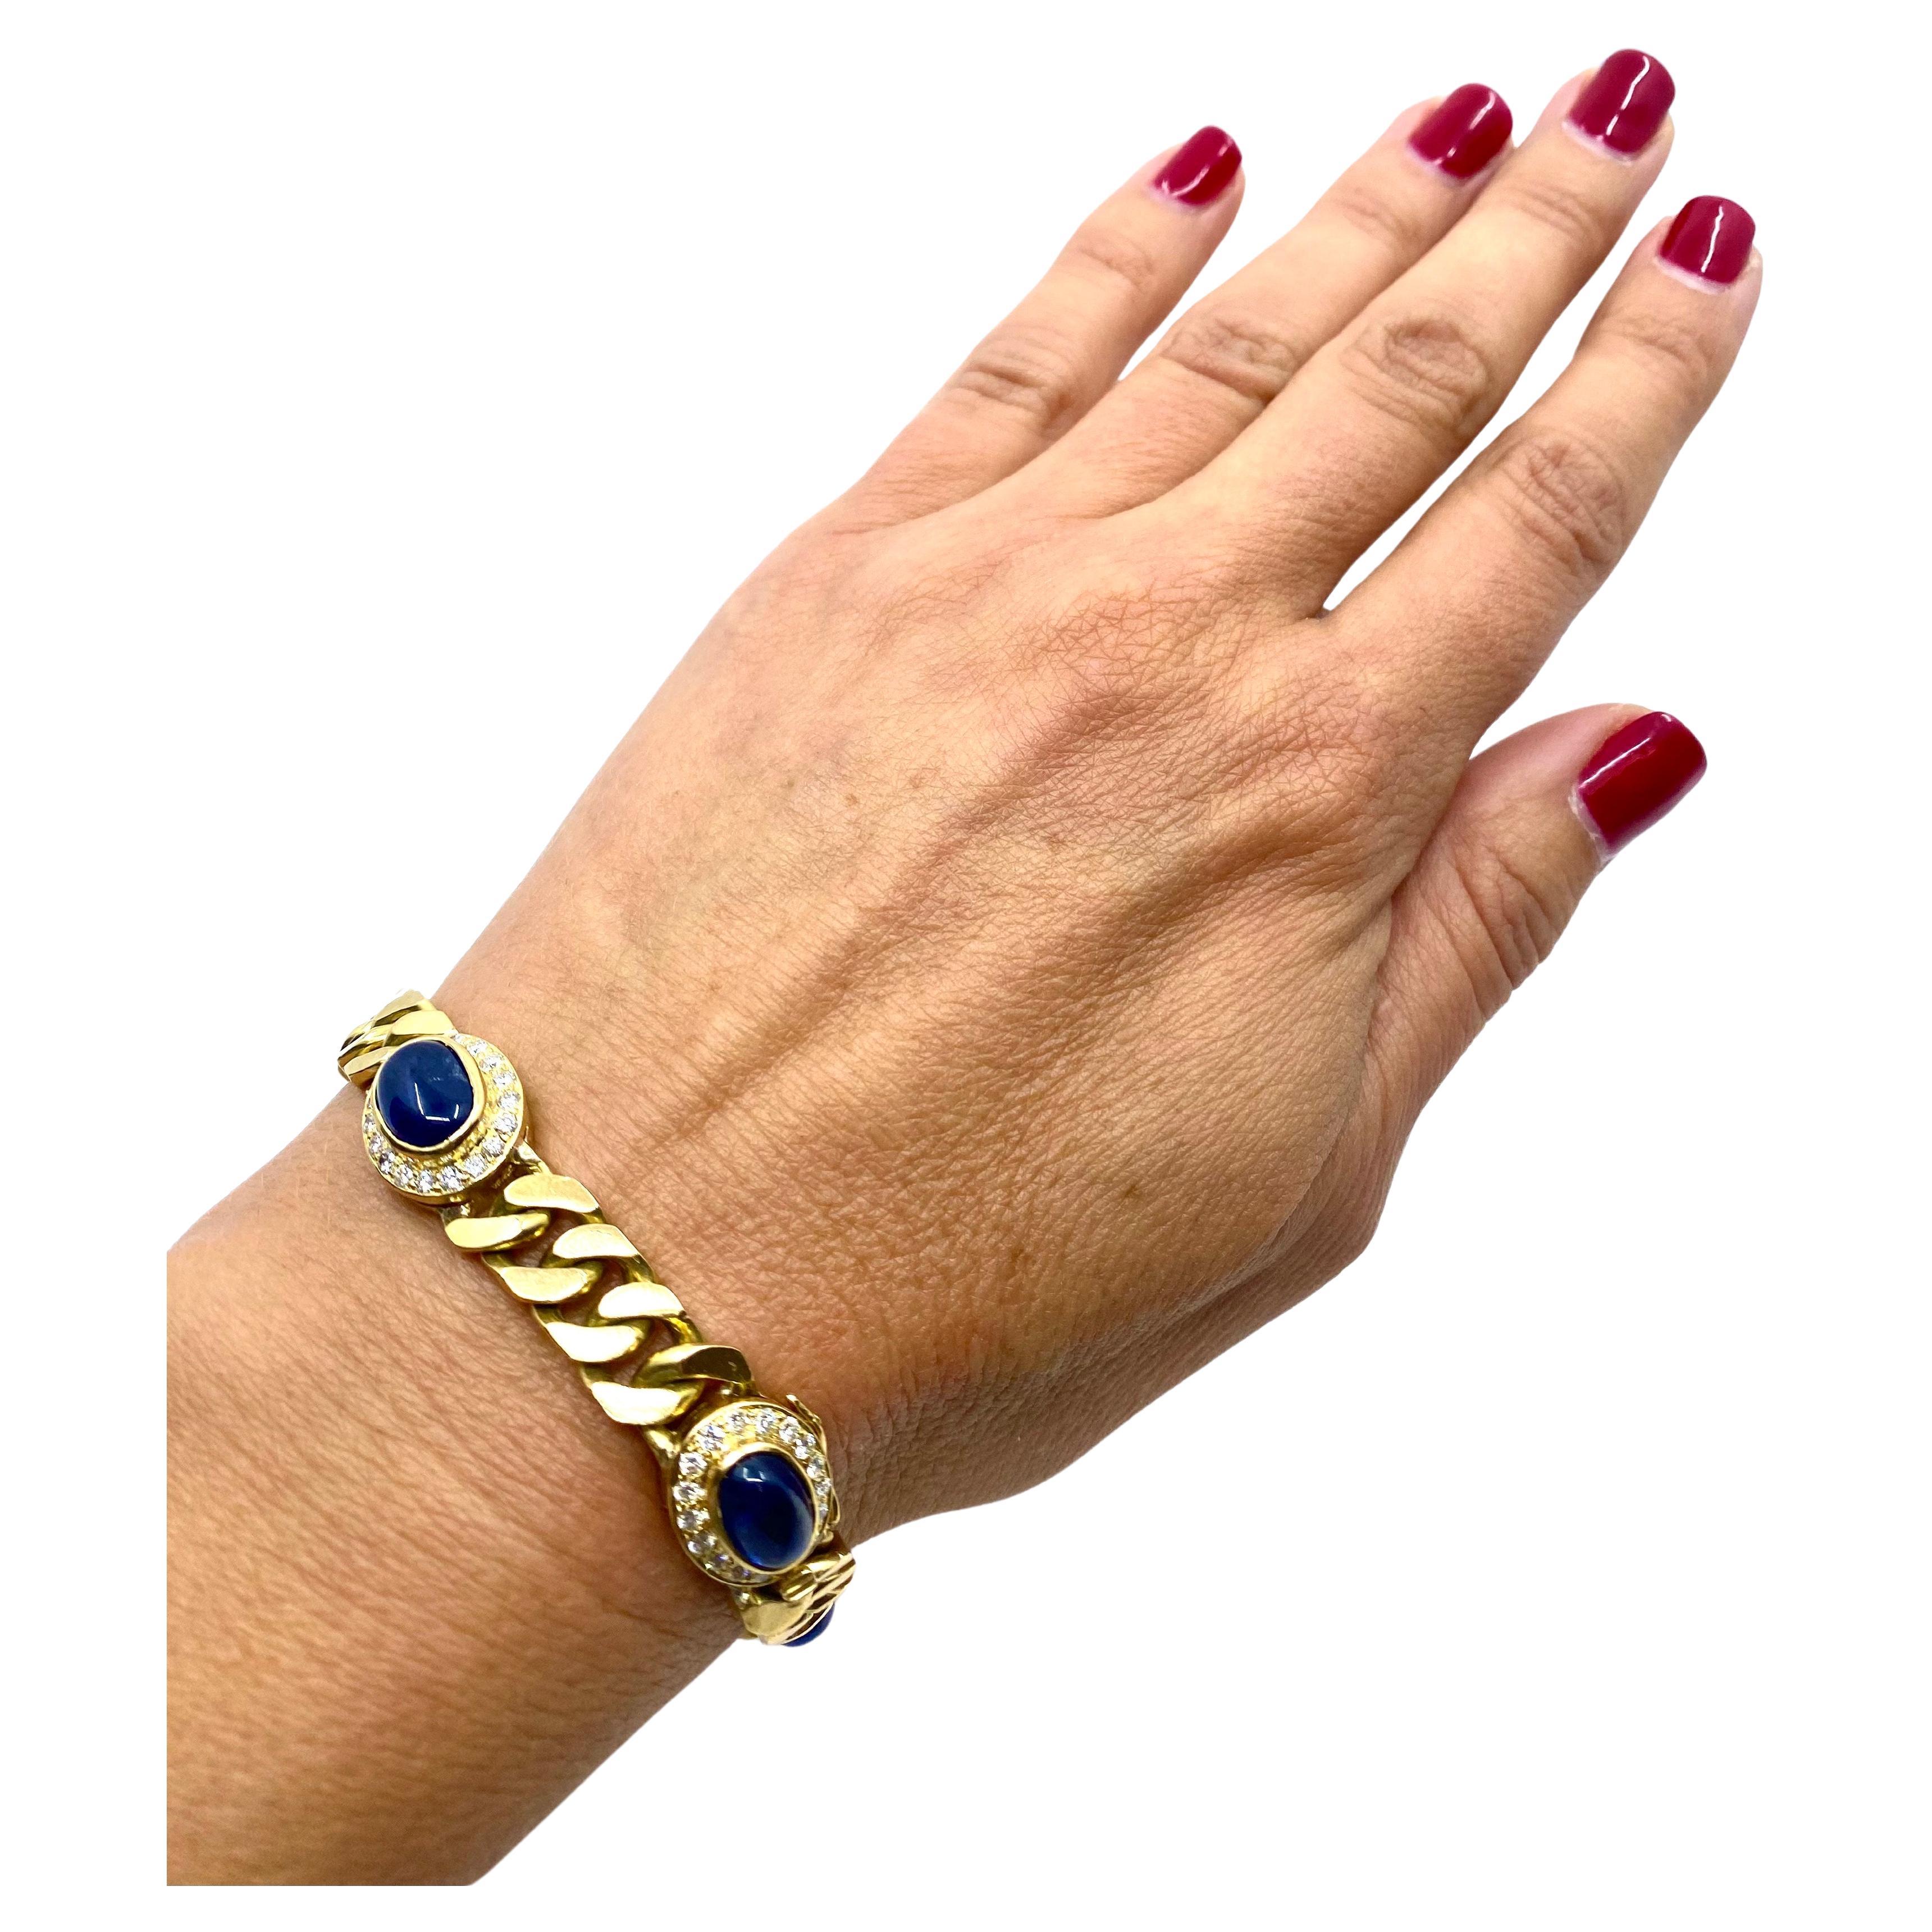 A classic vintage curblink chain bracelet made of 18k gold, features sapphire and diamond. The sapphires are cabochon cut, bezel set, five gems in total. The diamonds are round cut, set to beautifully frame the sapphires and underline their deep